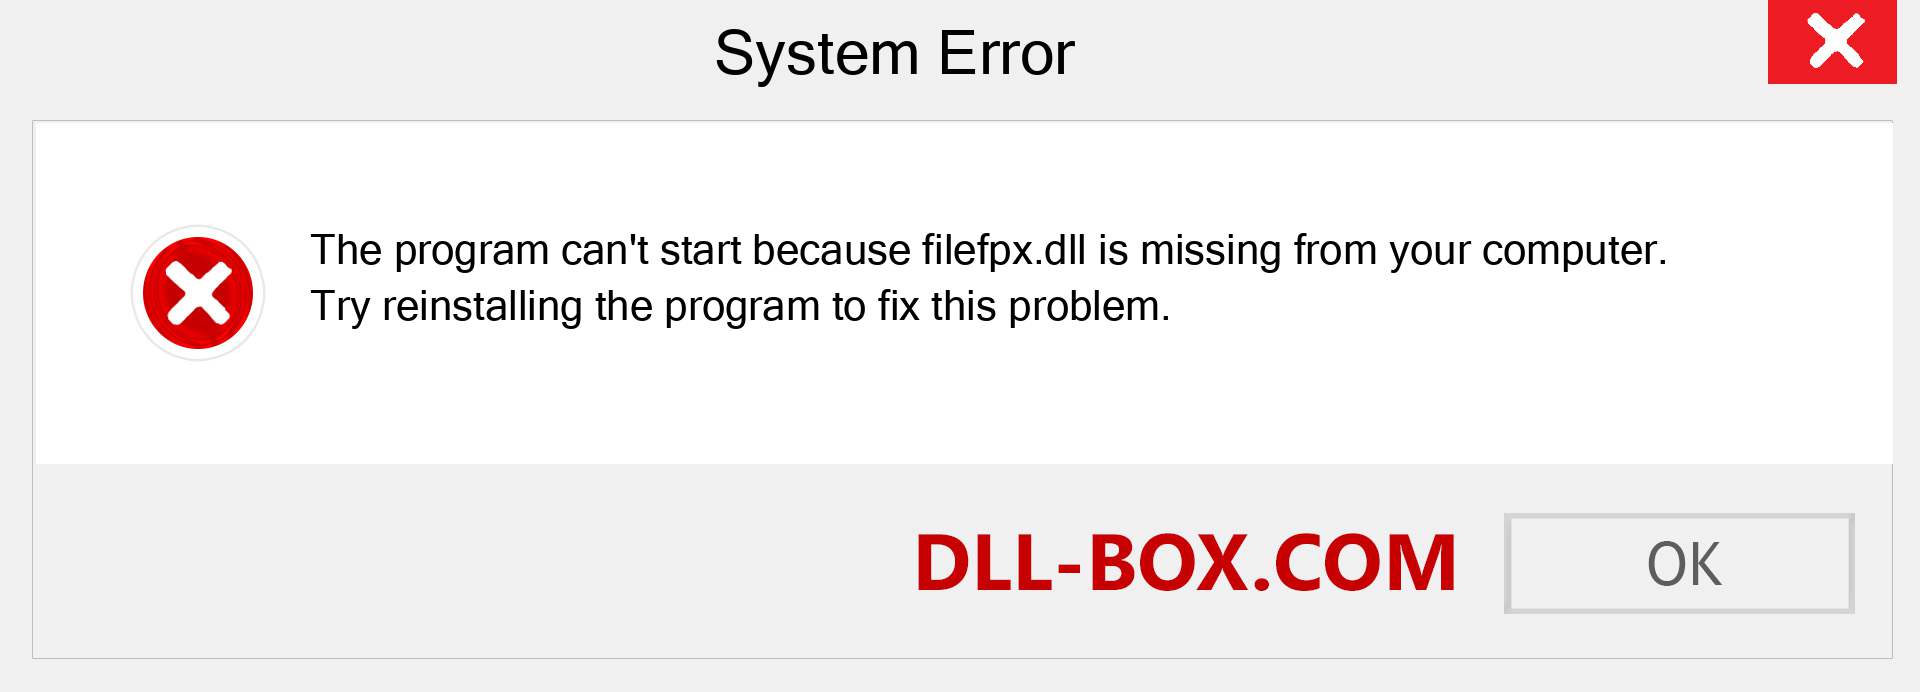  filefpx.dll file is missing?. Download for Windows 7, 8, 10 - Fix  filefpx dll Missing Error on Windows, photos, images